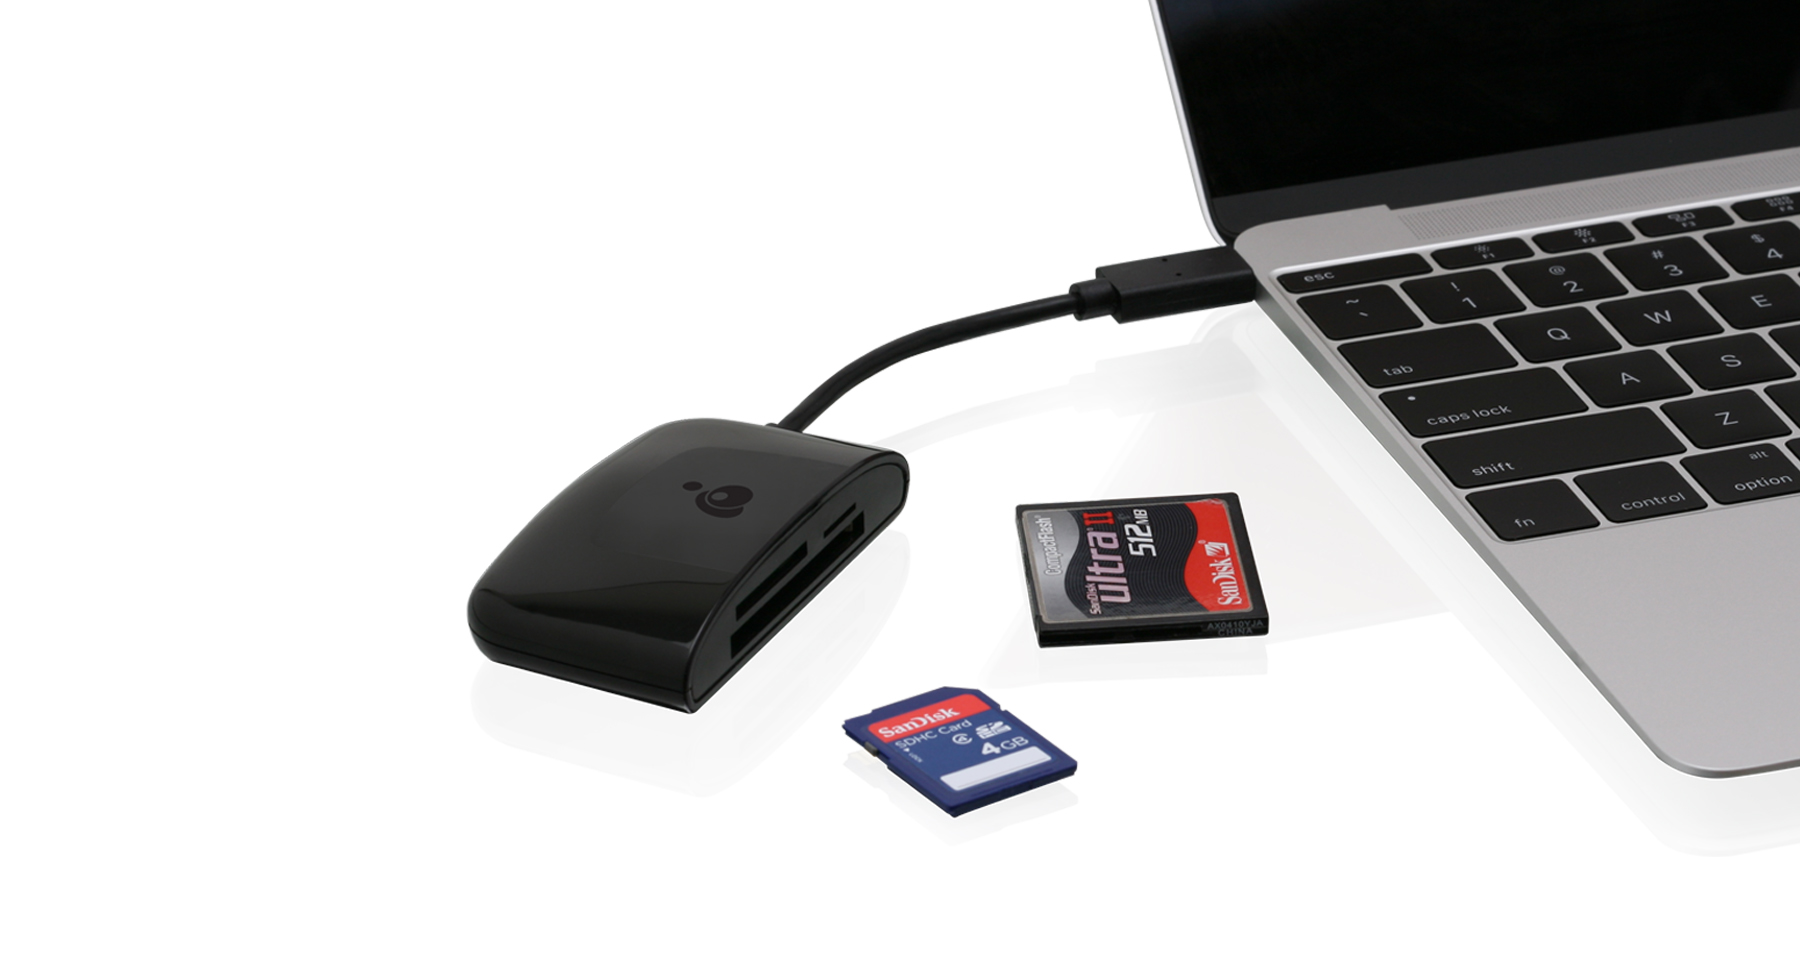 Card reader for mac pro